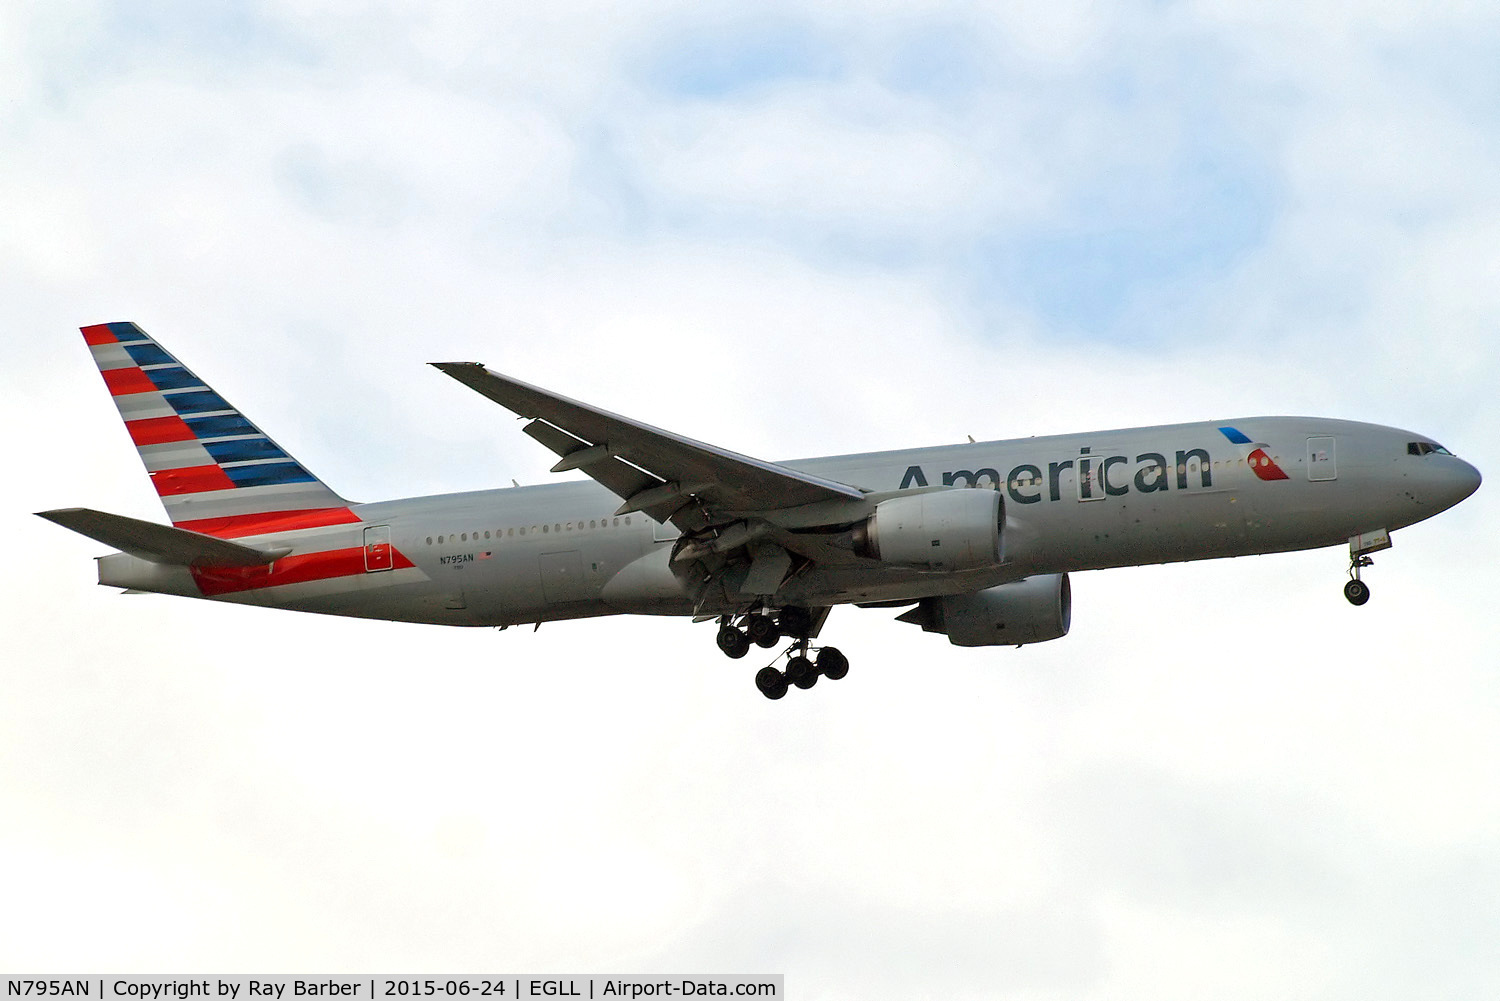 N795AN, 2000 Boeing 777-223 C/N 30257, Boeing 777-223ER [30257] (American Airlines) Home~G 24/06/2015. On approach 27L.